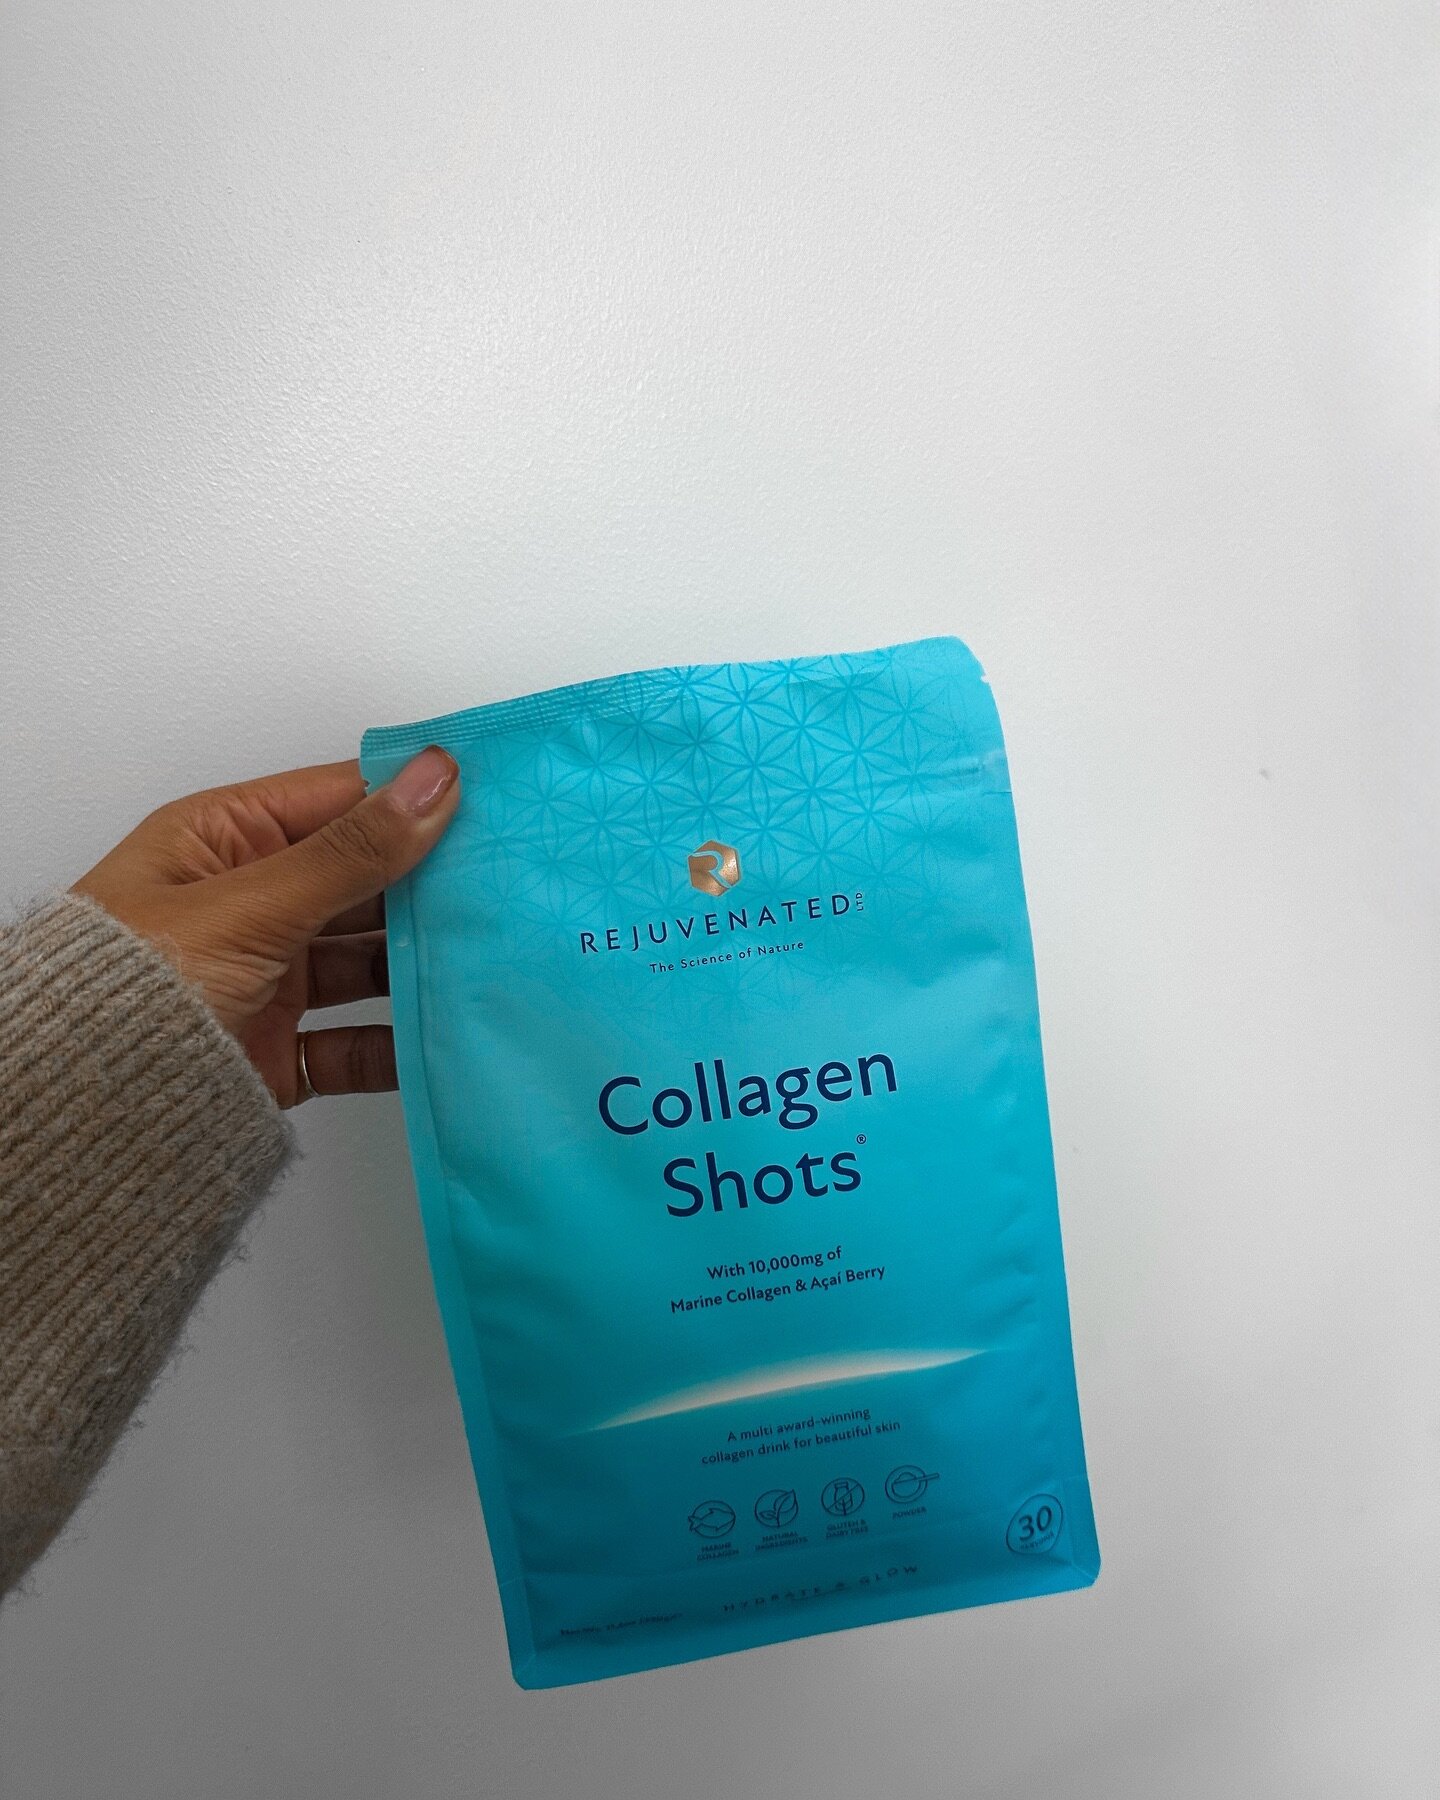 Did you know, by the time you turn 25 your body looses 1.5% of Collagen per year! 

Collagen is crucial for maintaining the structure of the skin and for preventing &amp; reducing wrinkles, lines, dryness &amp; sagging of the skin.

Our rejuvenated C